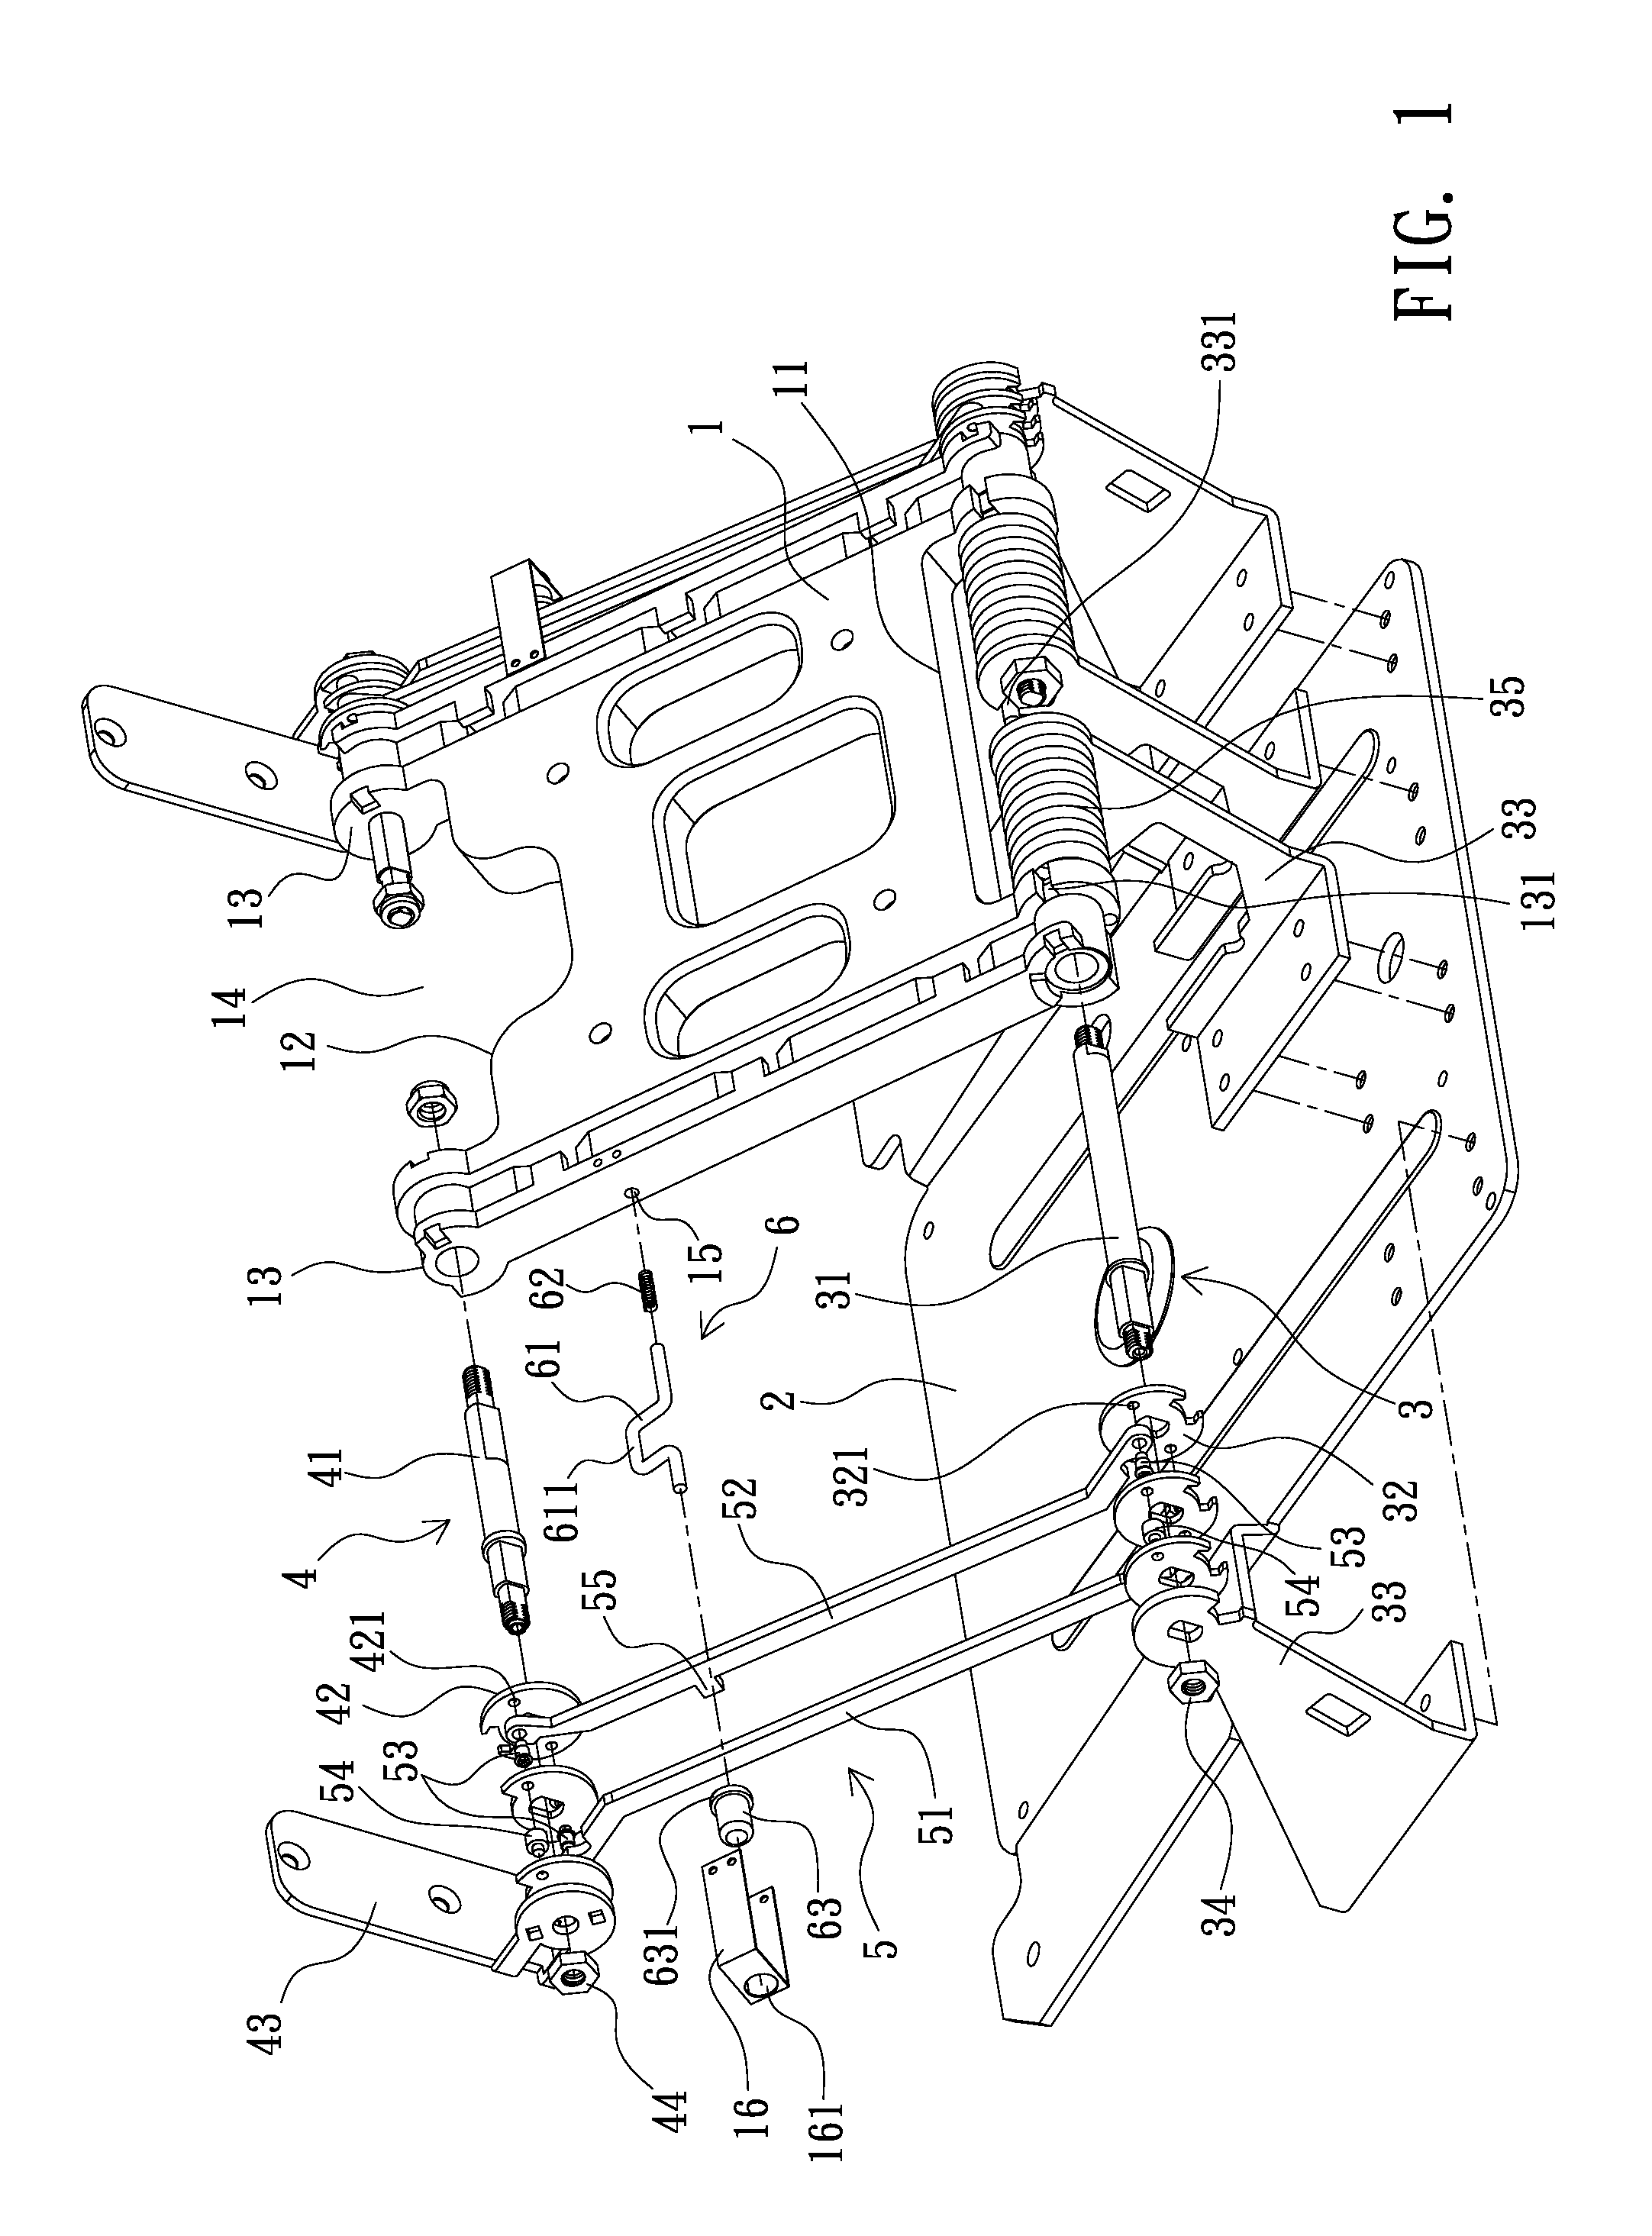 Supporting structure having function of rod-linkage latching